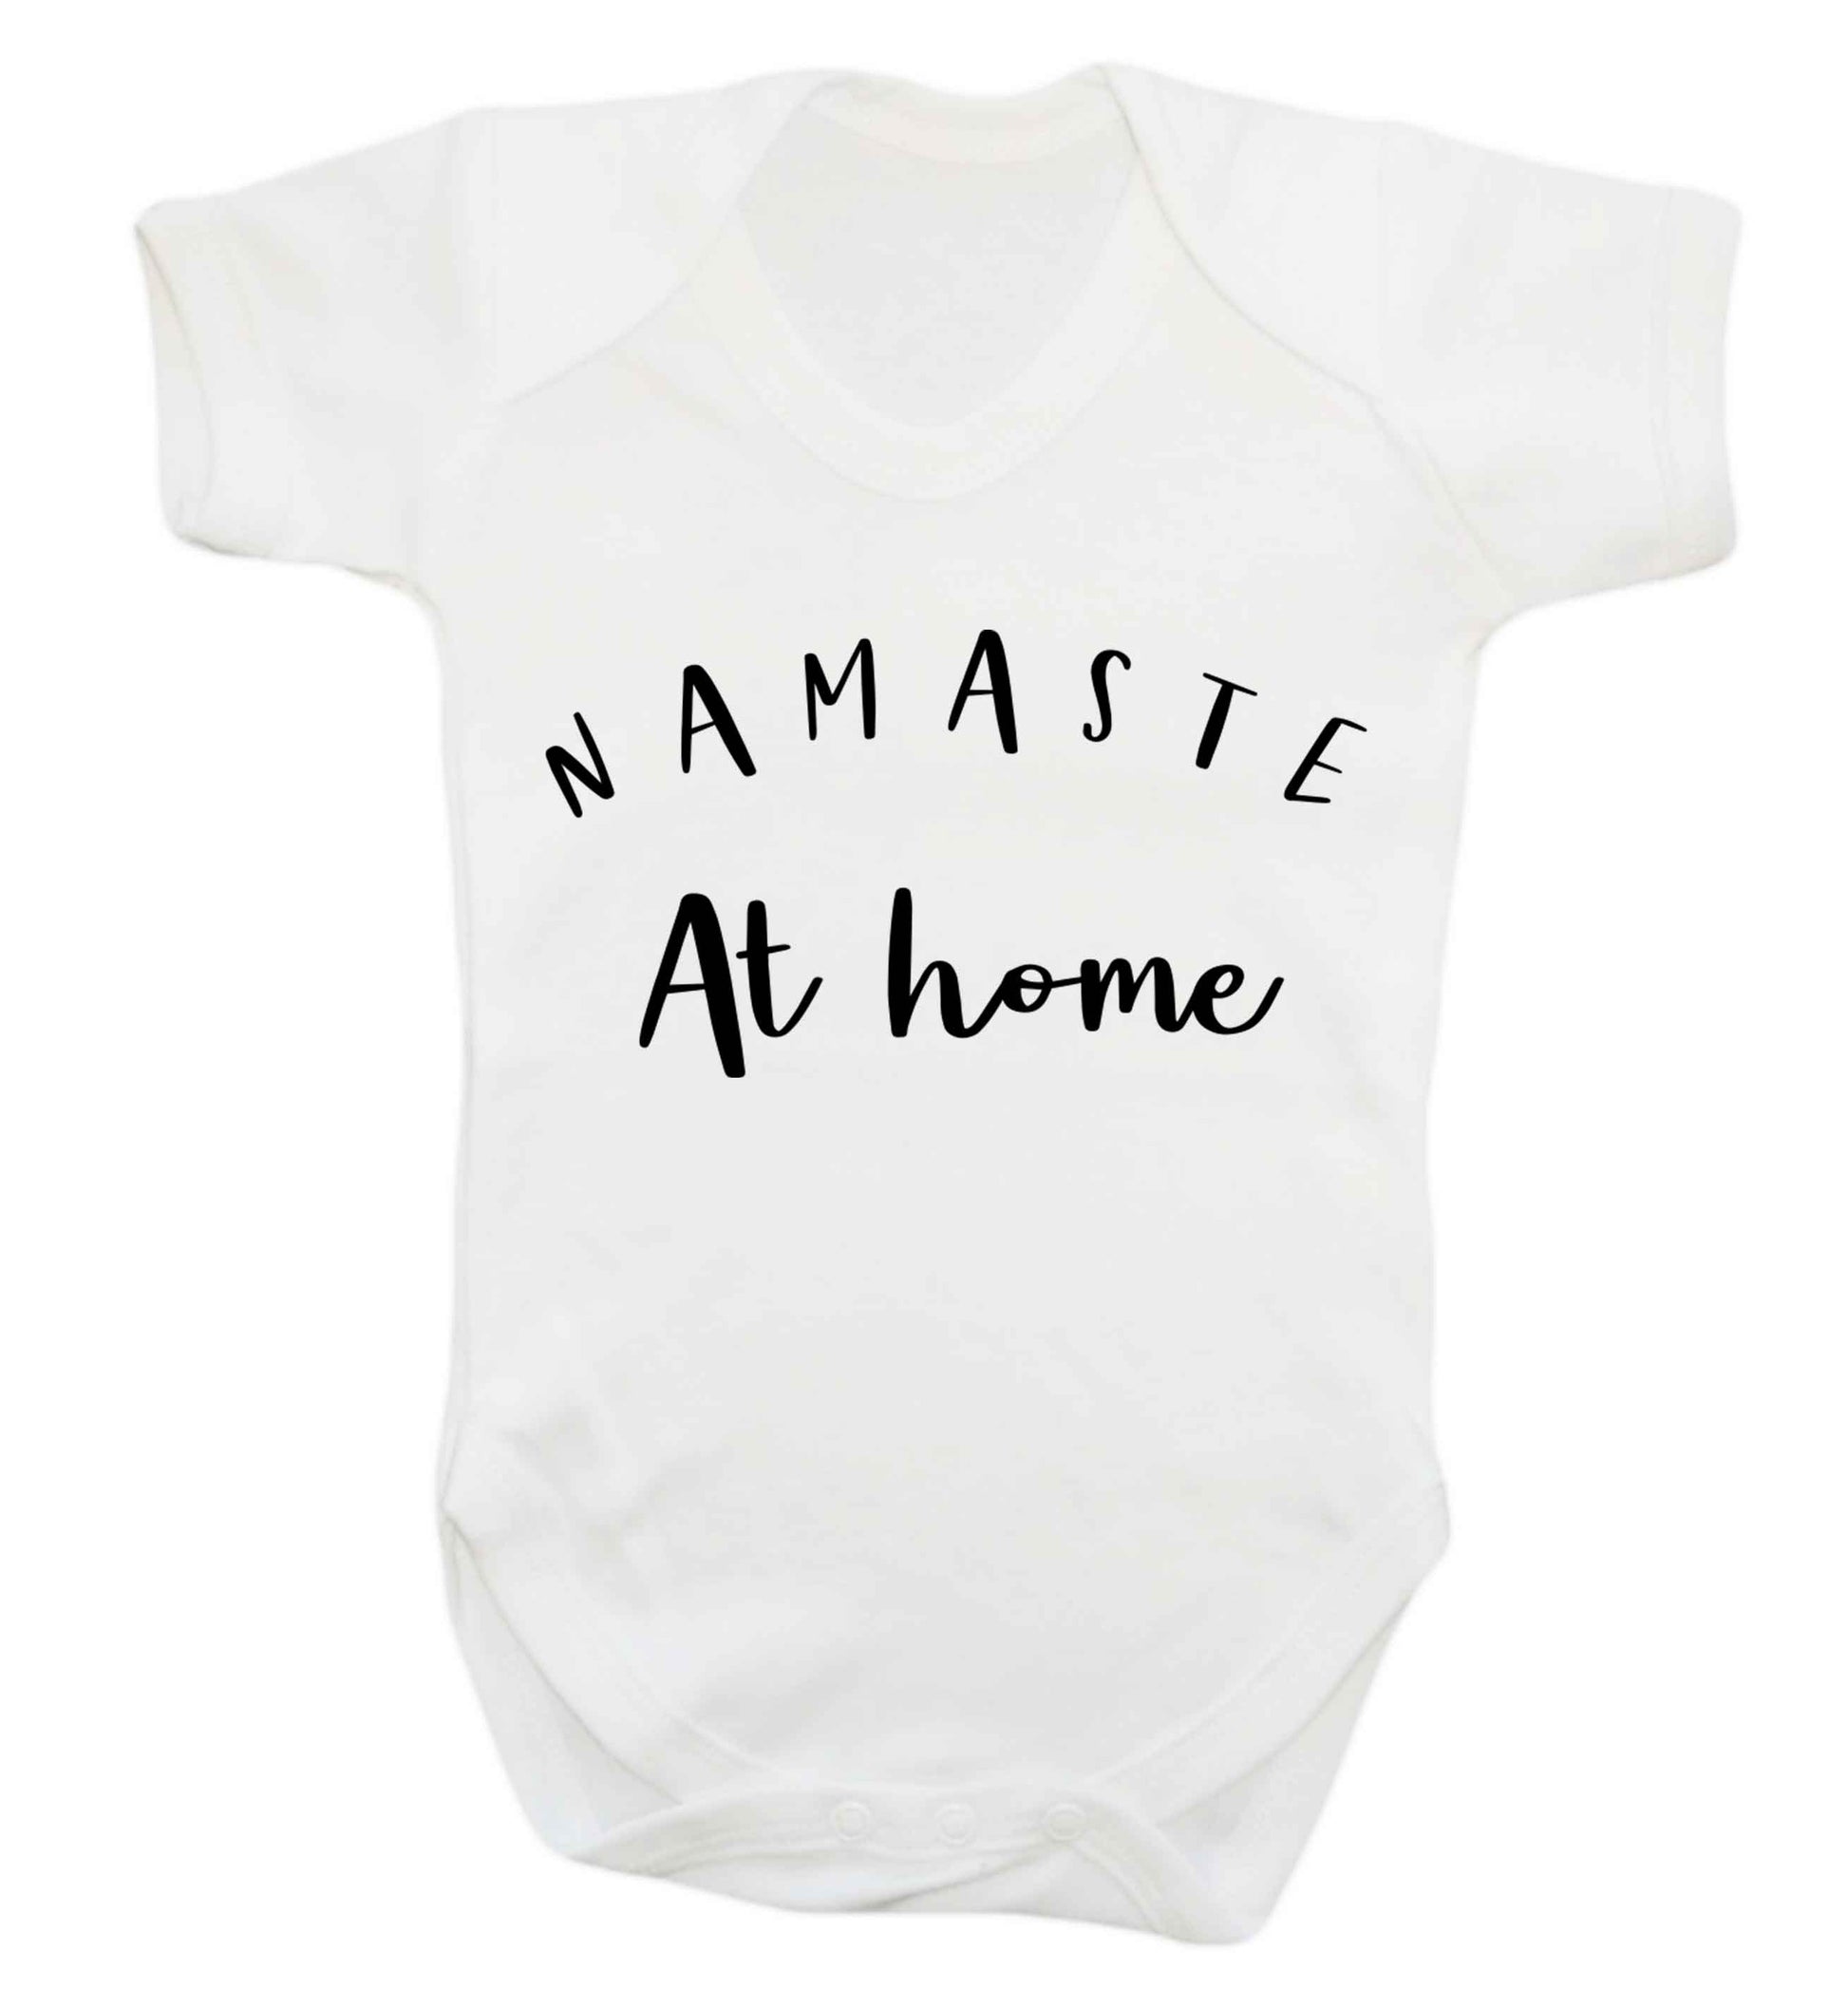 Namaste at home Baby Vest white 18-24 months